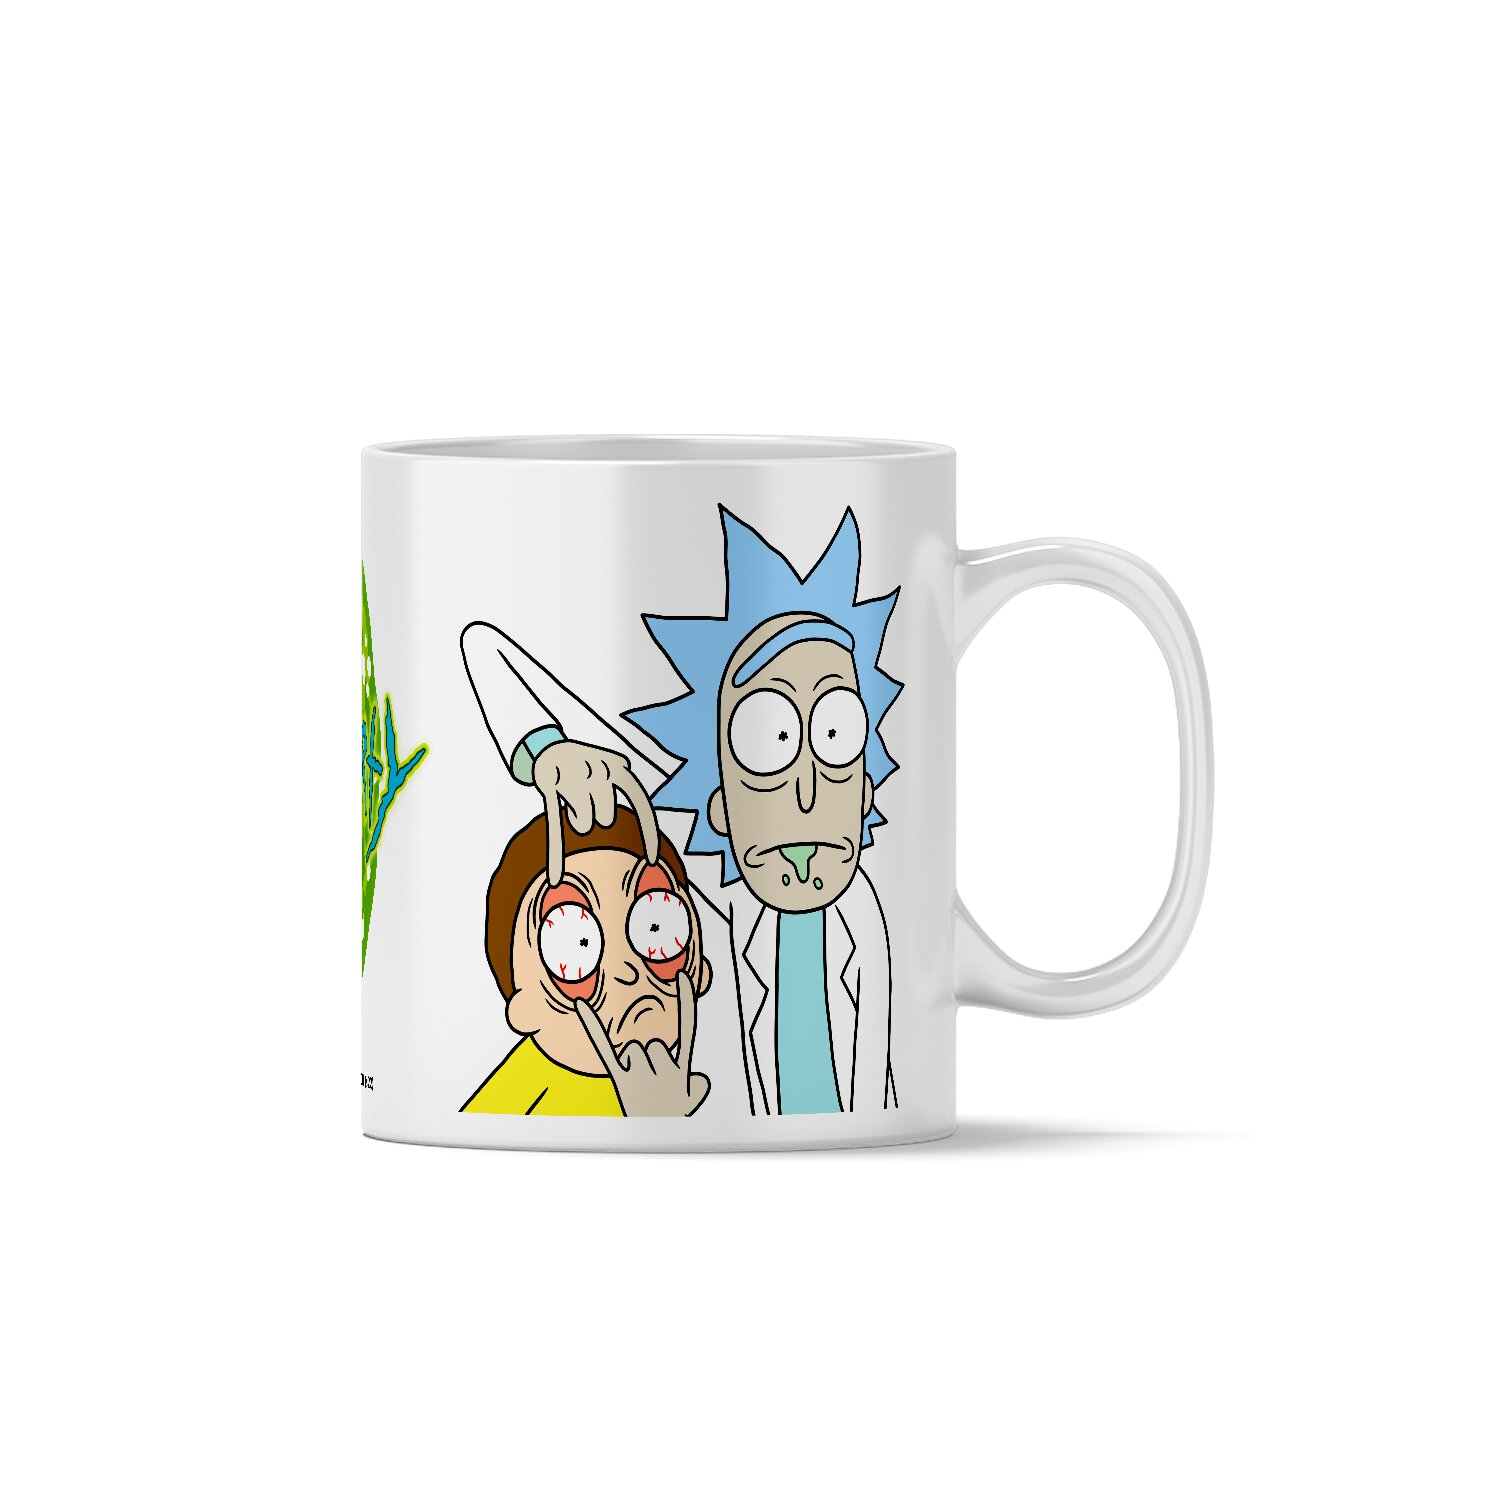 Rick Teebecher Morty and Kaffee- Morty 330ml und 007 Muster